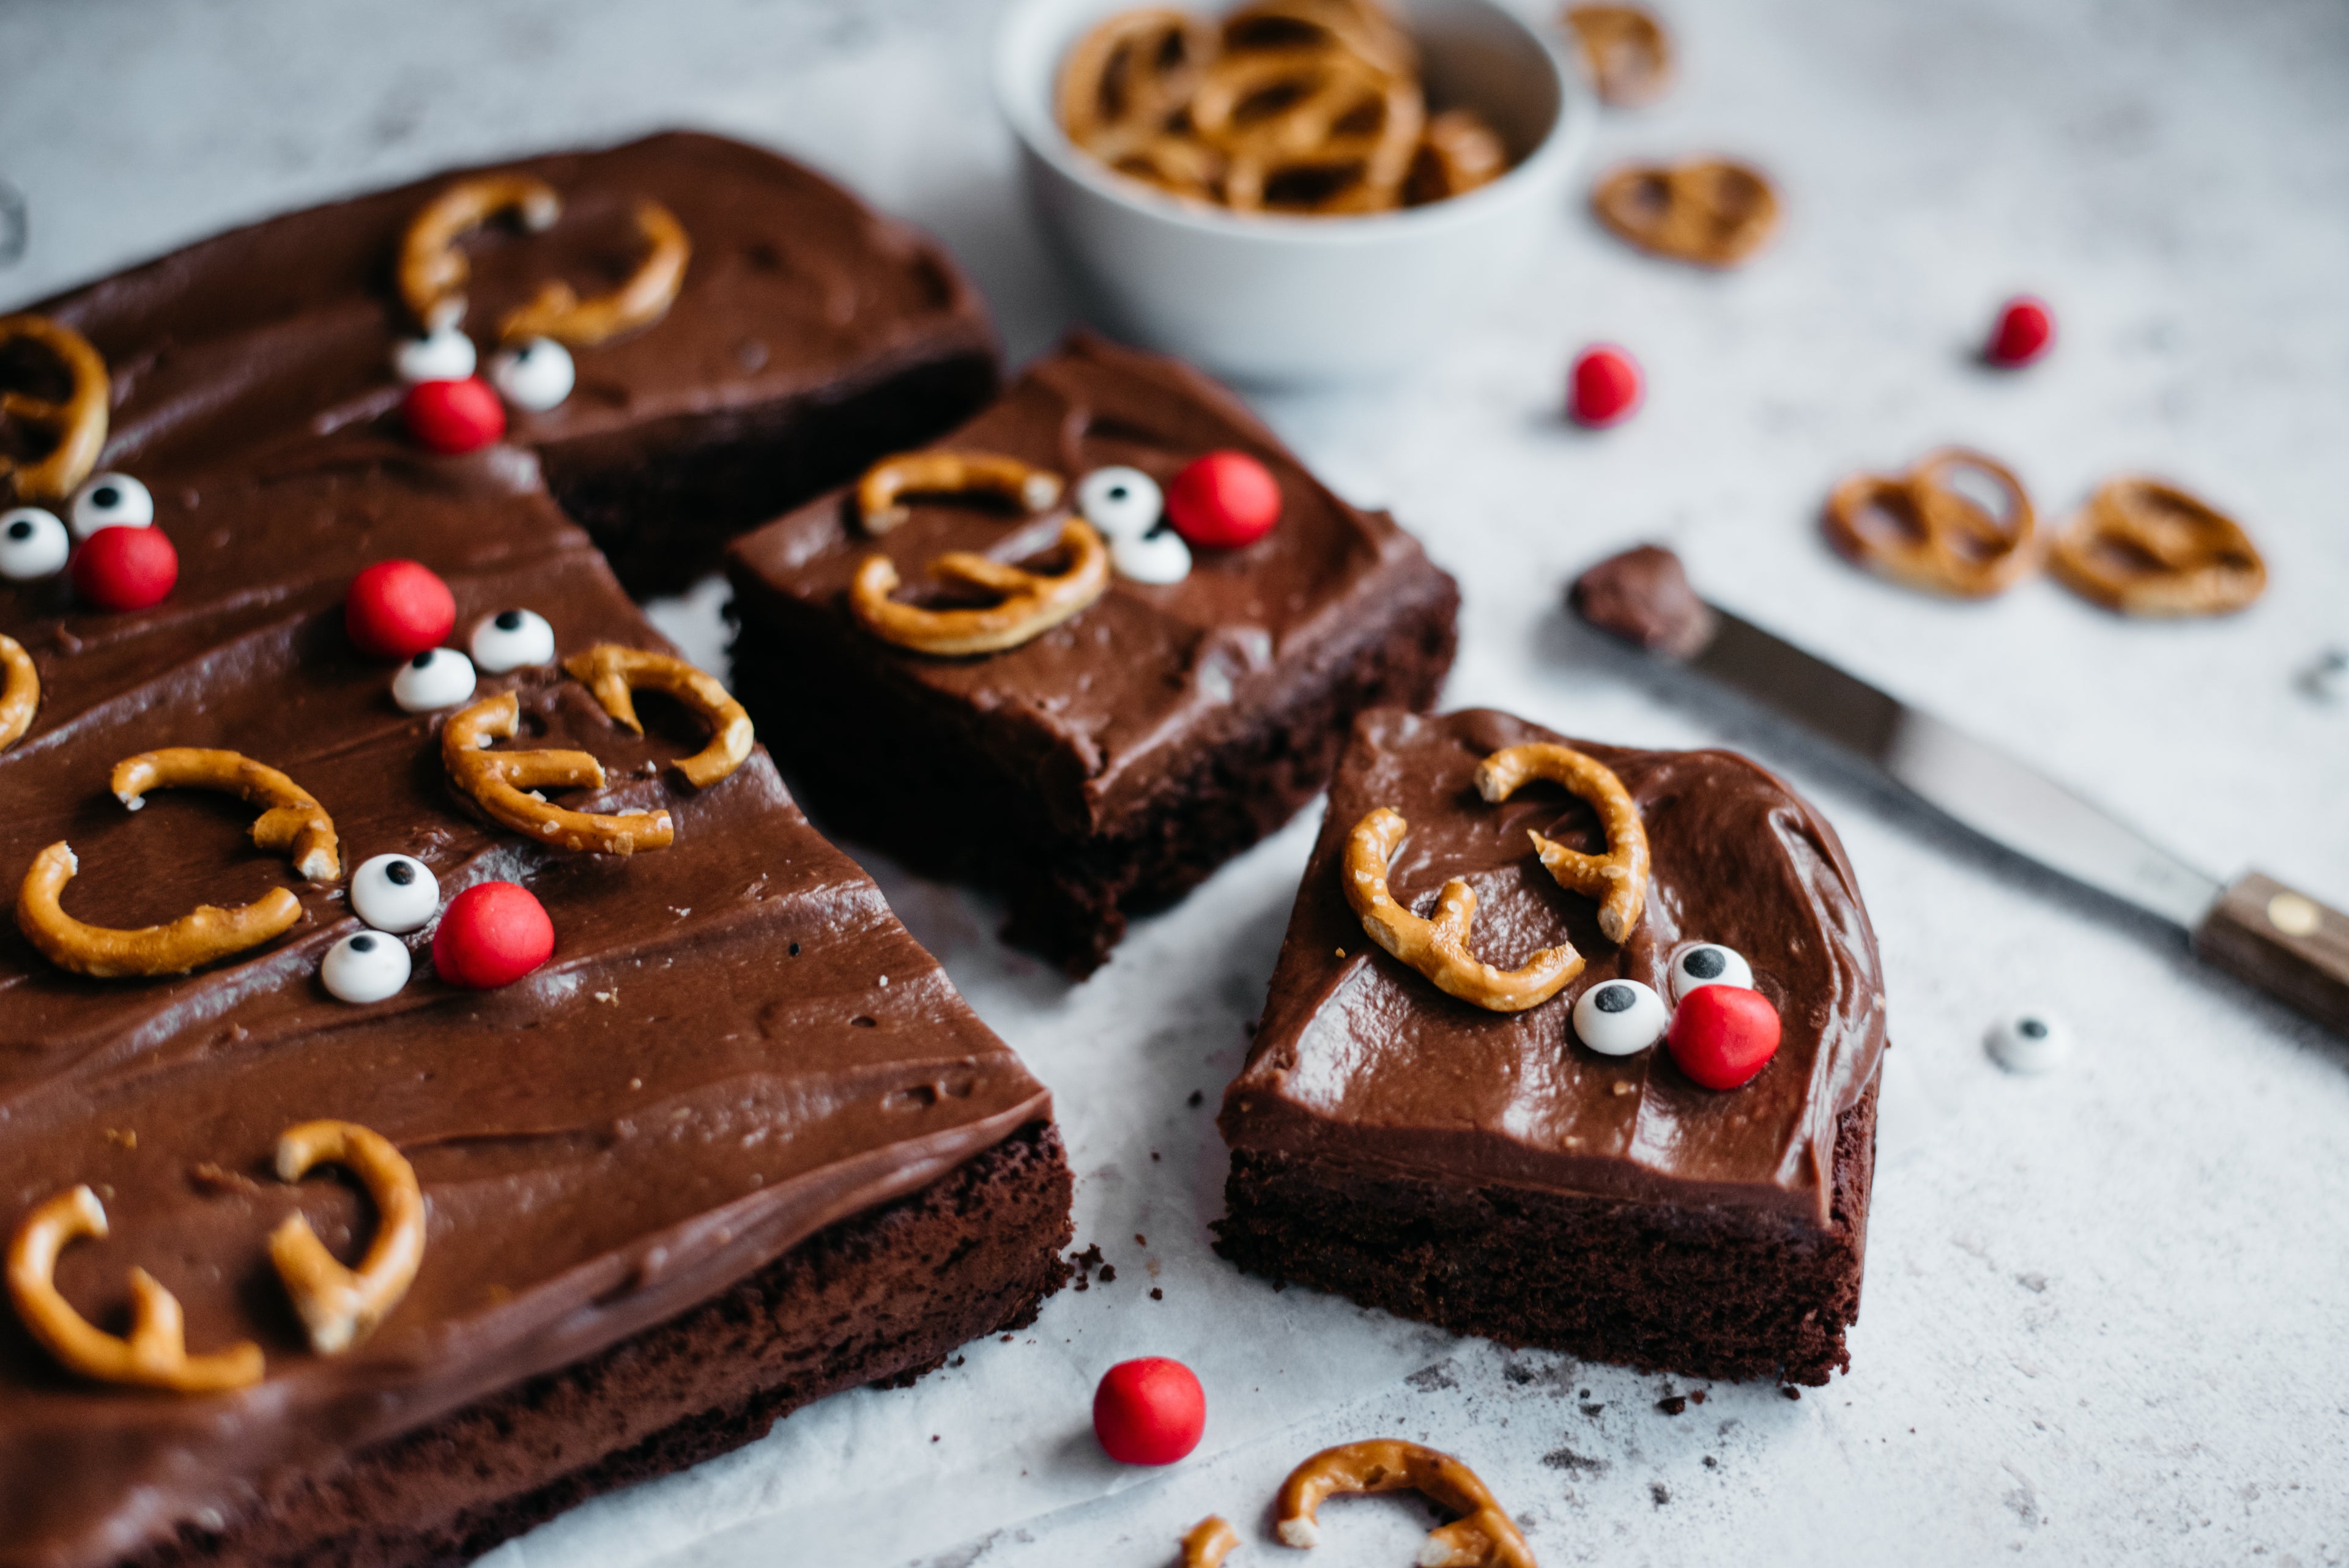 Close up of a slice of Chocolate & Caramel Reindeer Traybake decorated with pretzels 